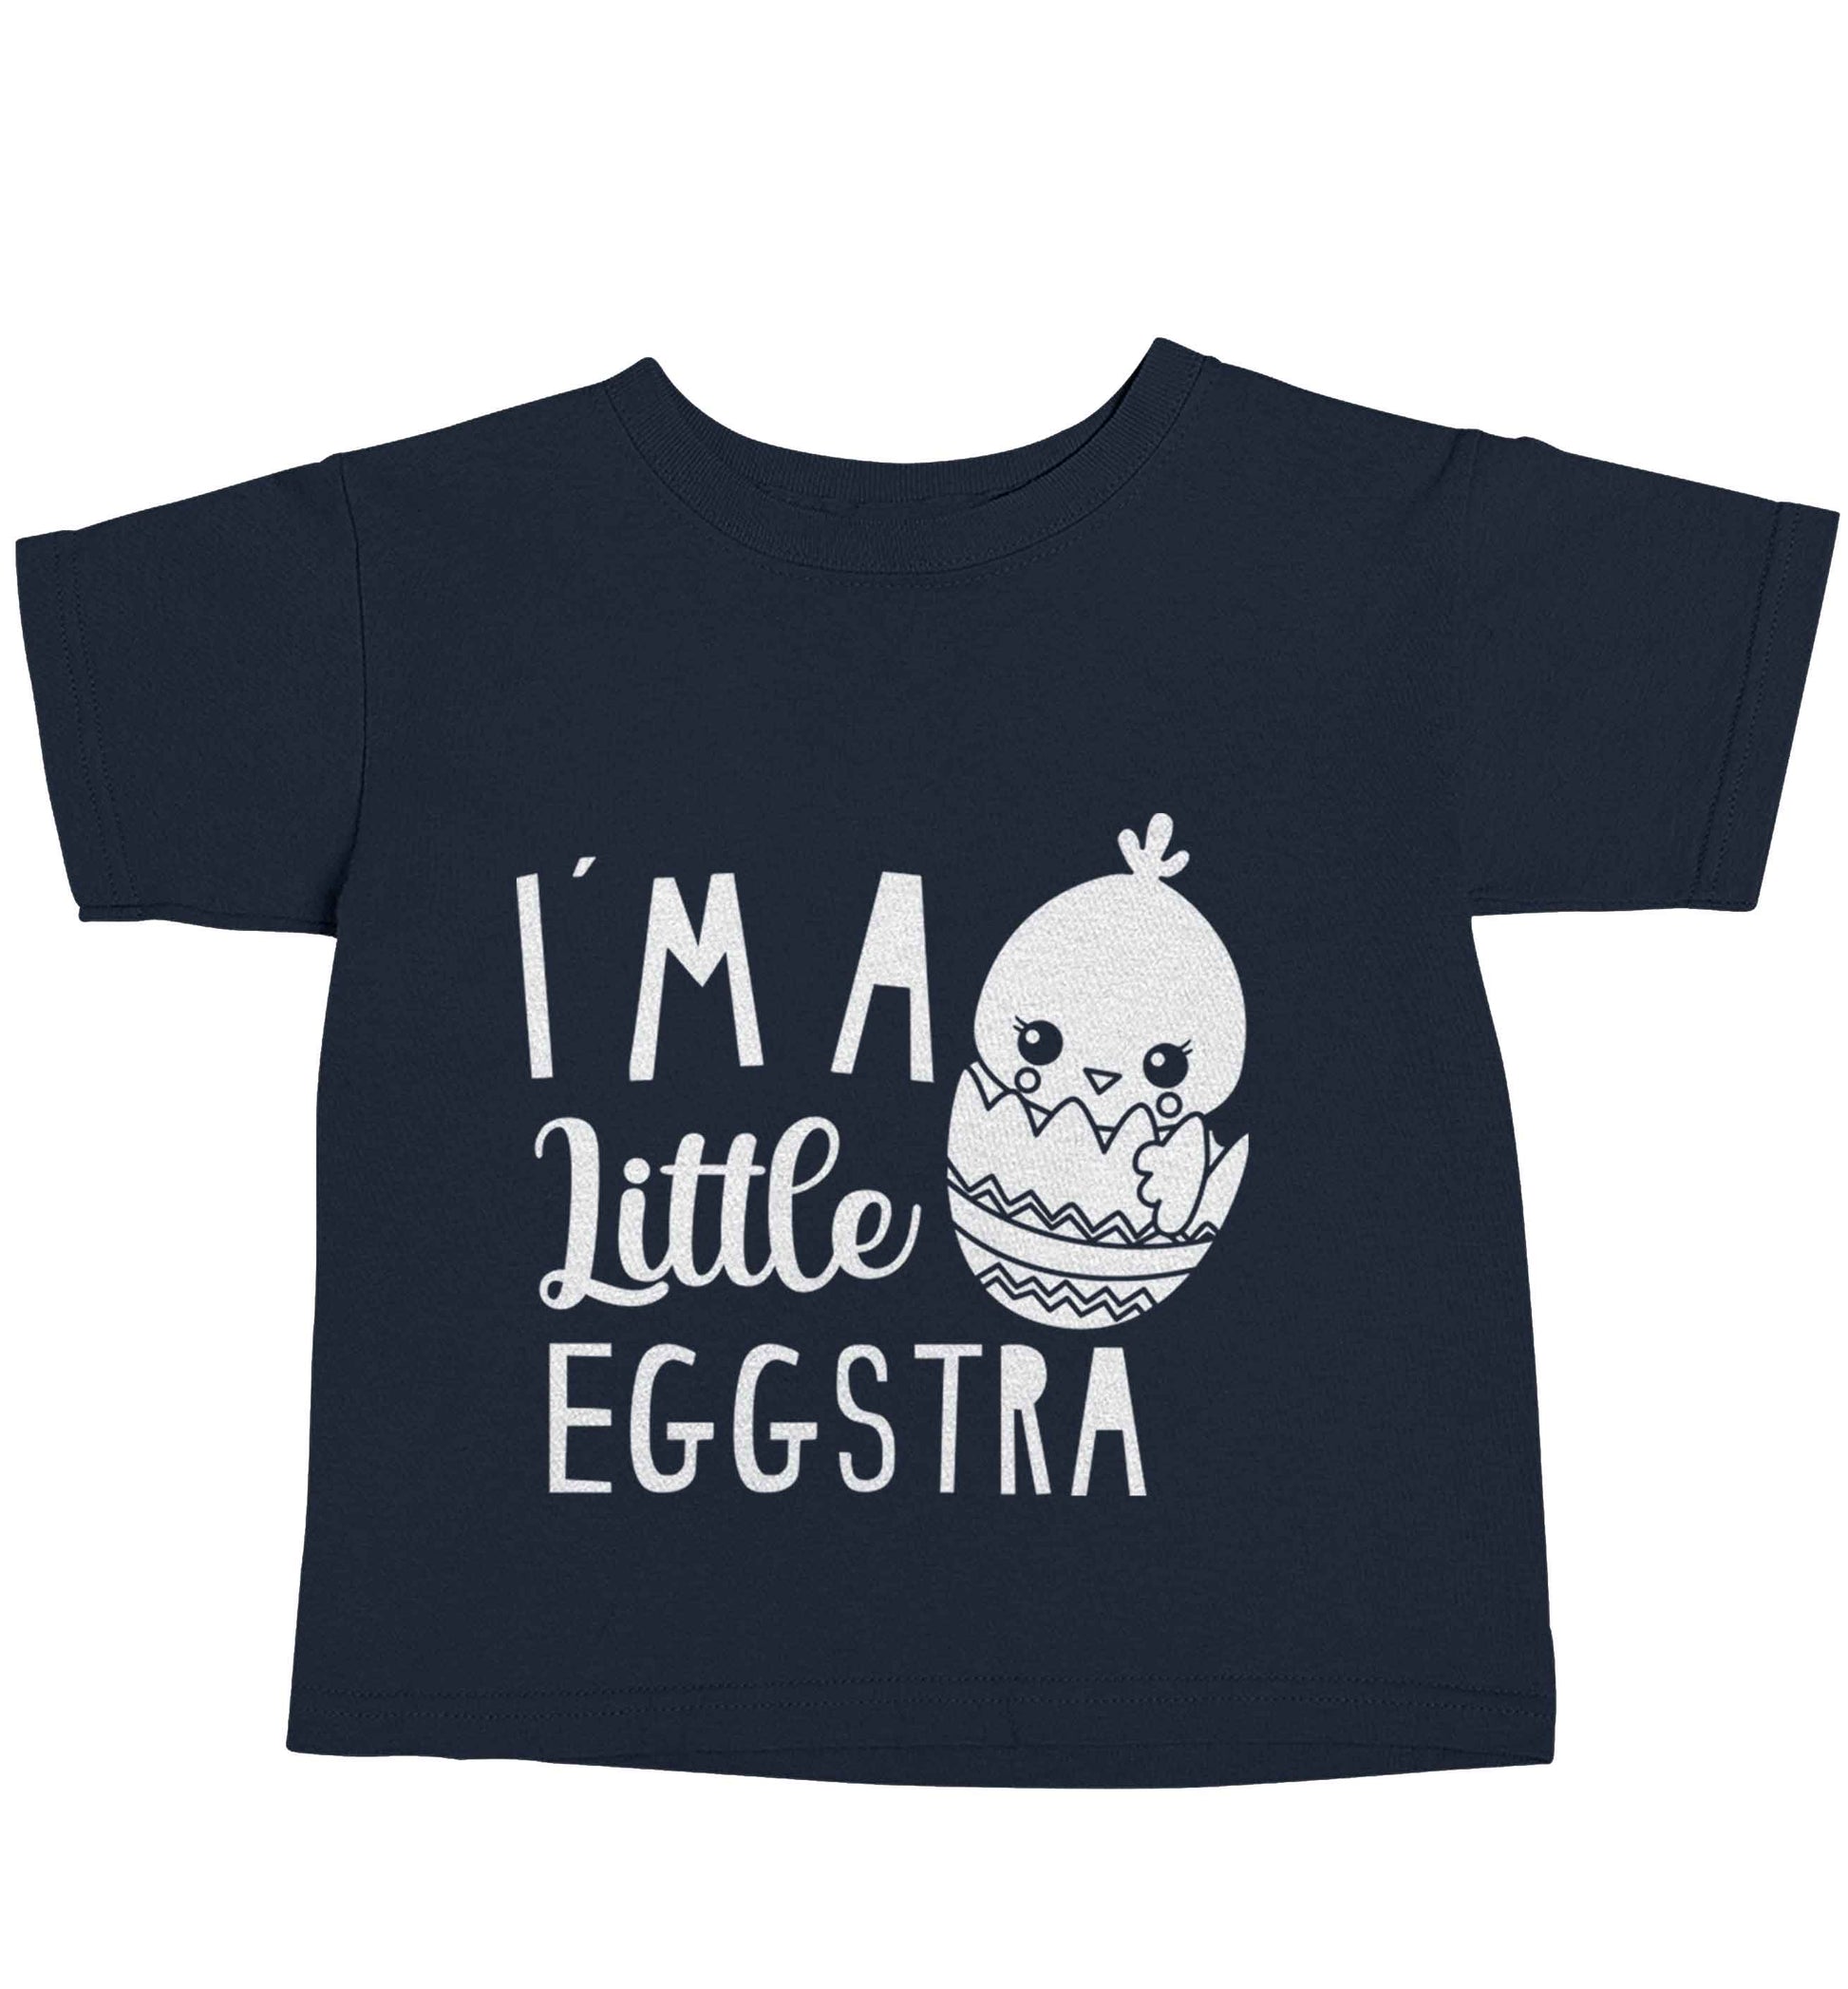 I'm a little eggstra navy baby toddler Tshirt 2 Years